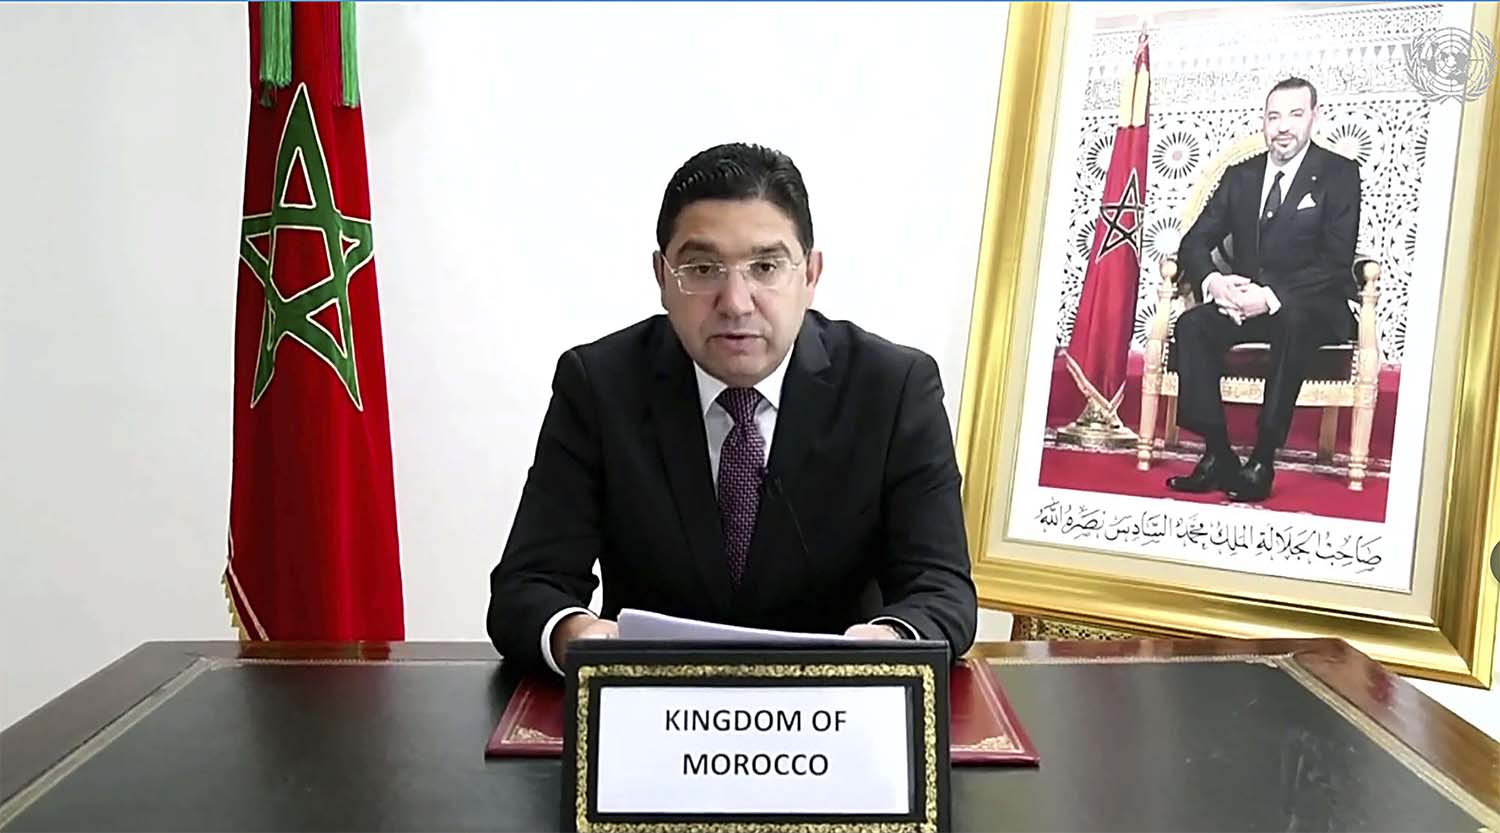 Bourita expressed Morocco's concern about the tragic humanitarian situation of the population in the Tindouf camps